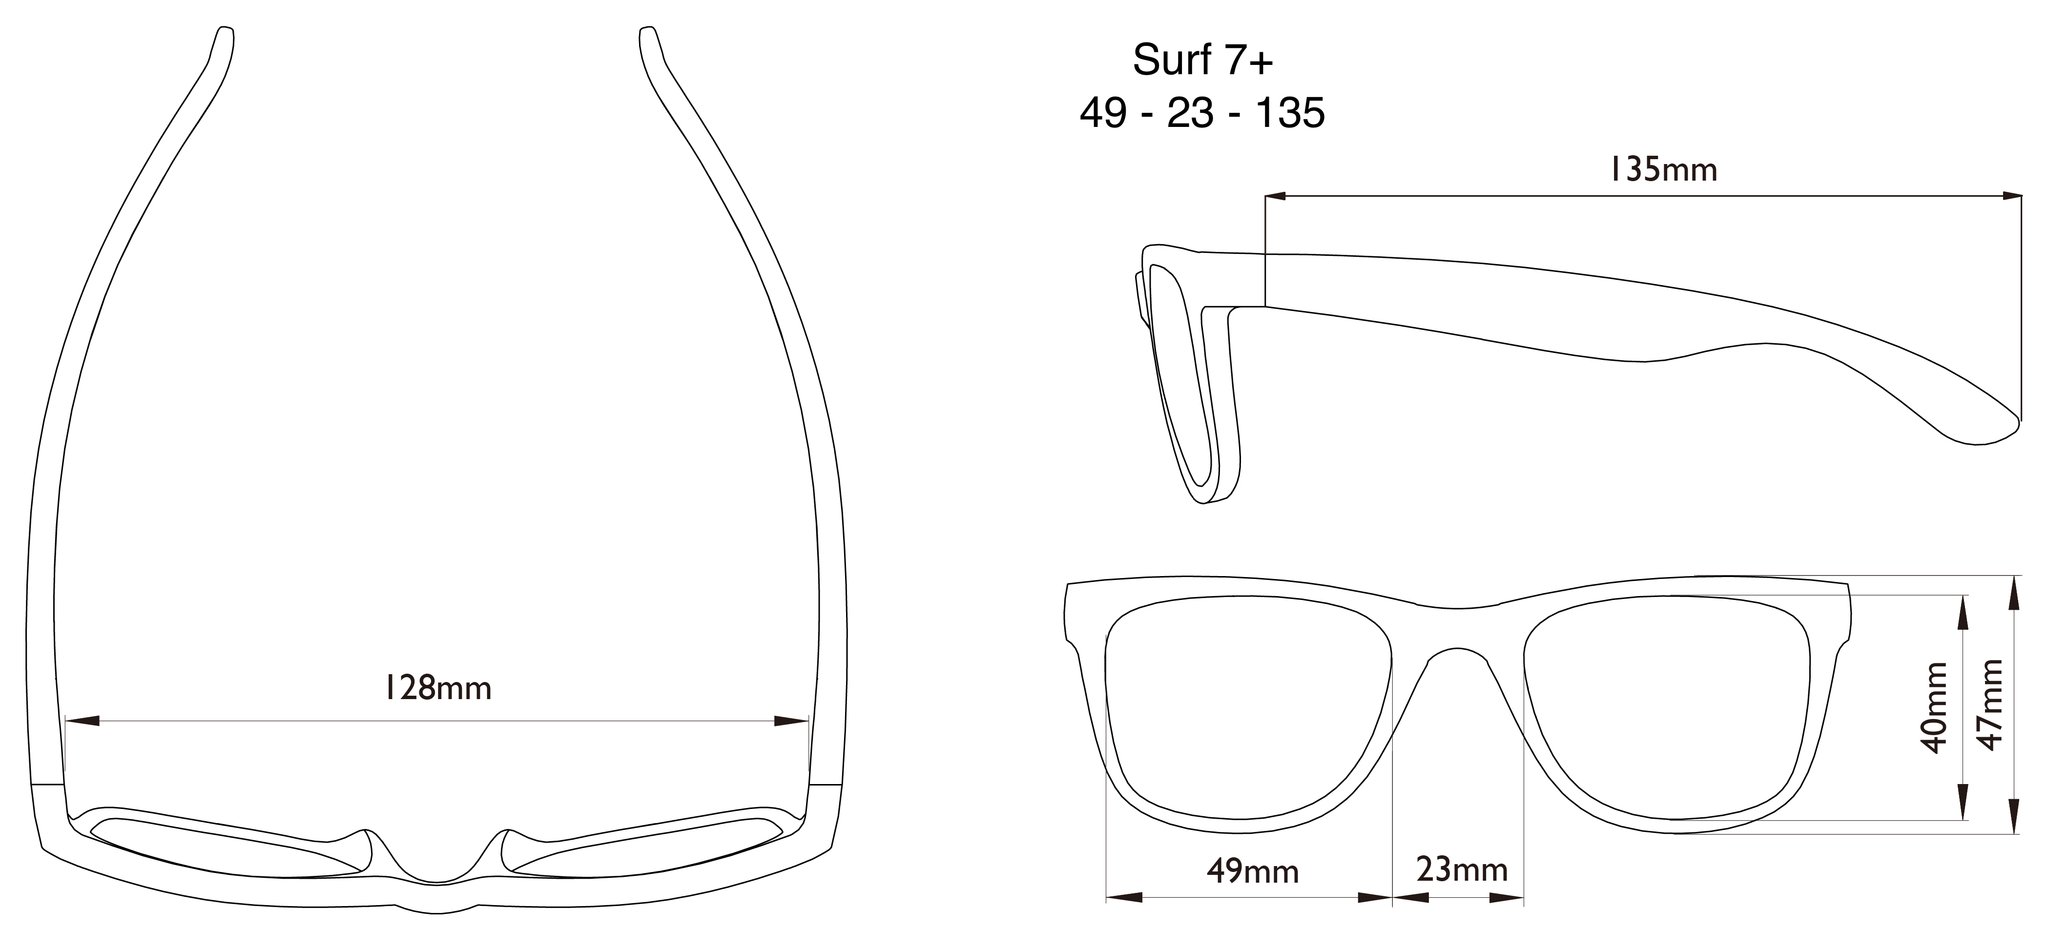 Dimensions of the Surf Kids Sunglasses